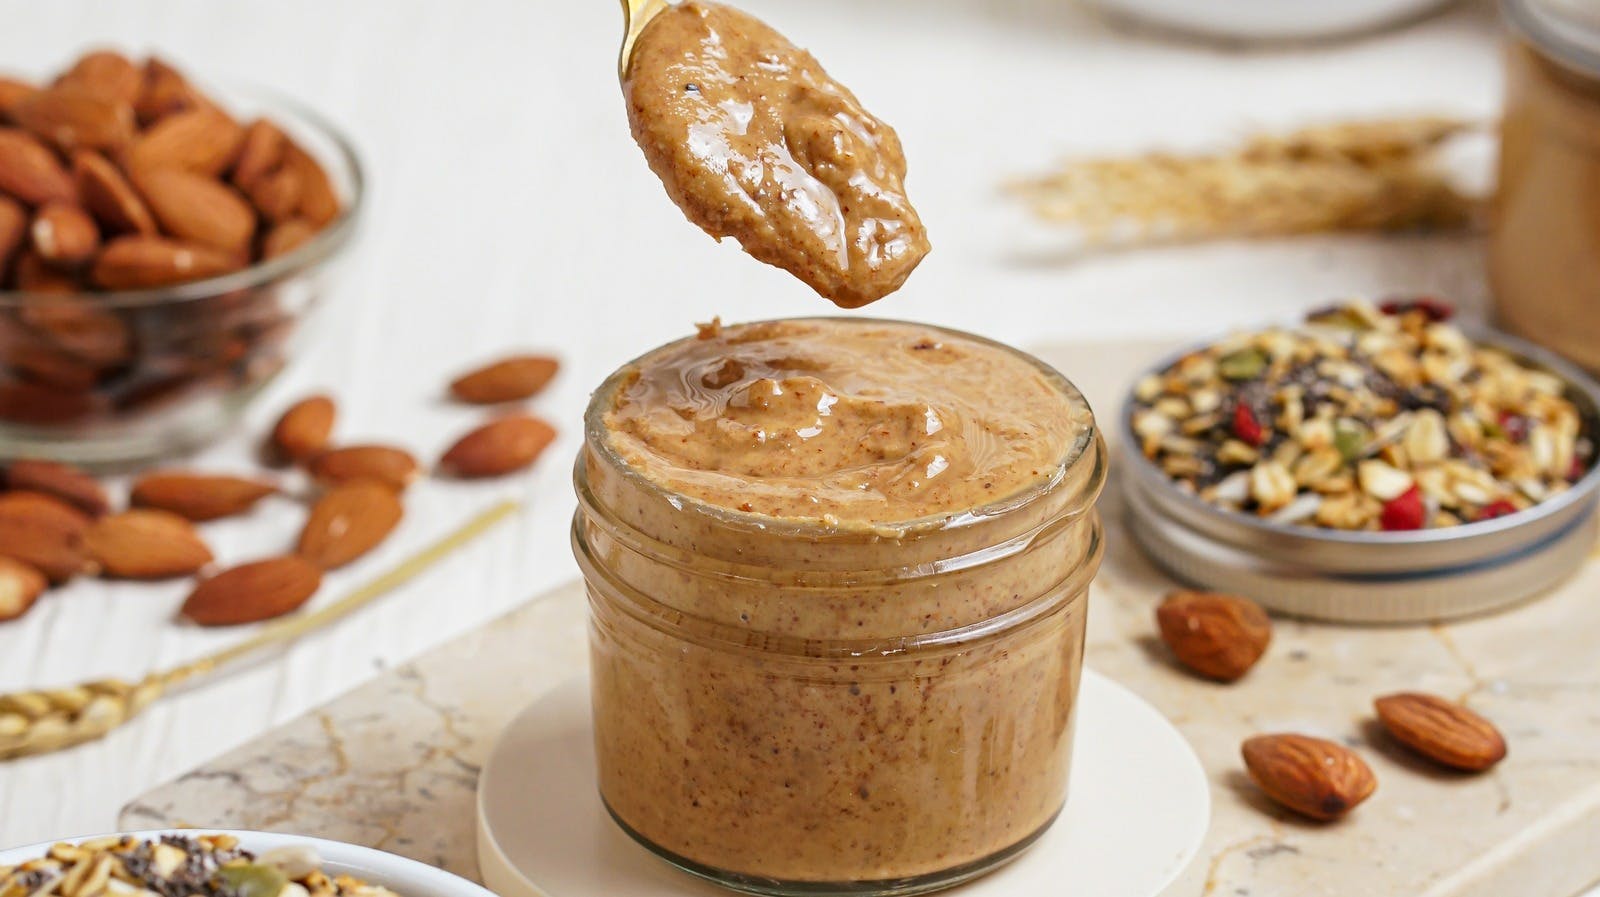 1. Nuts And Nut Butters